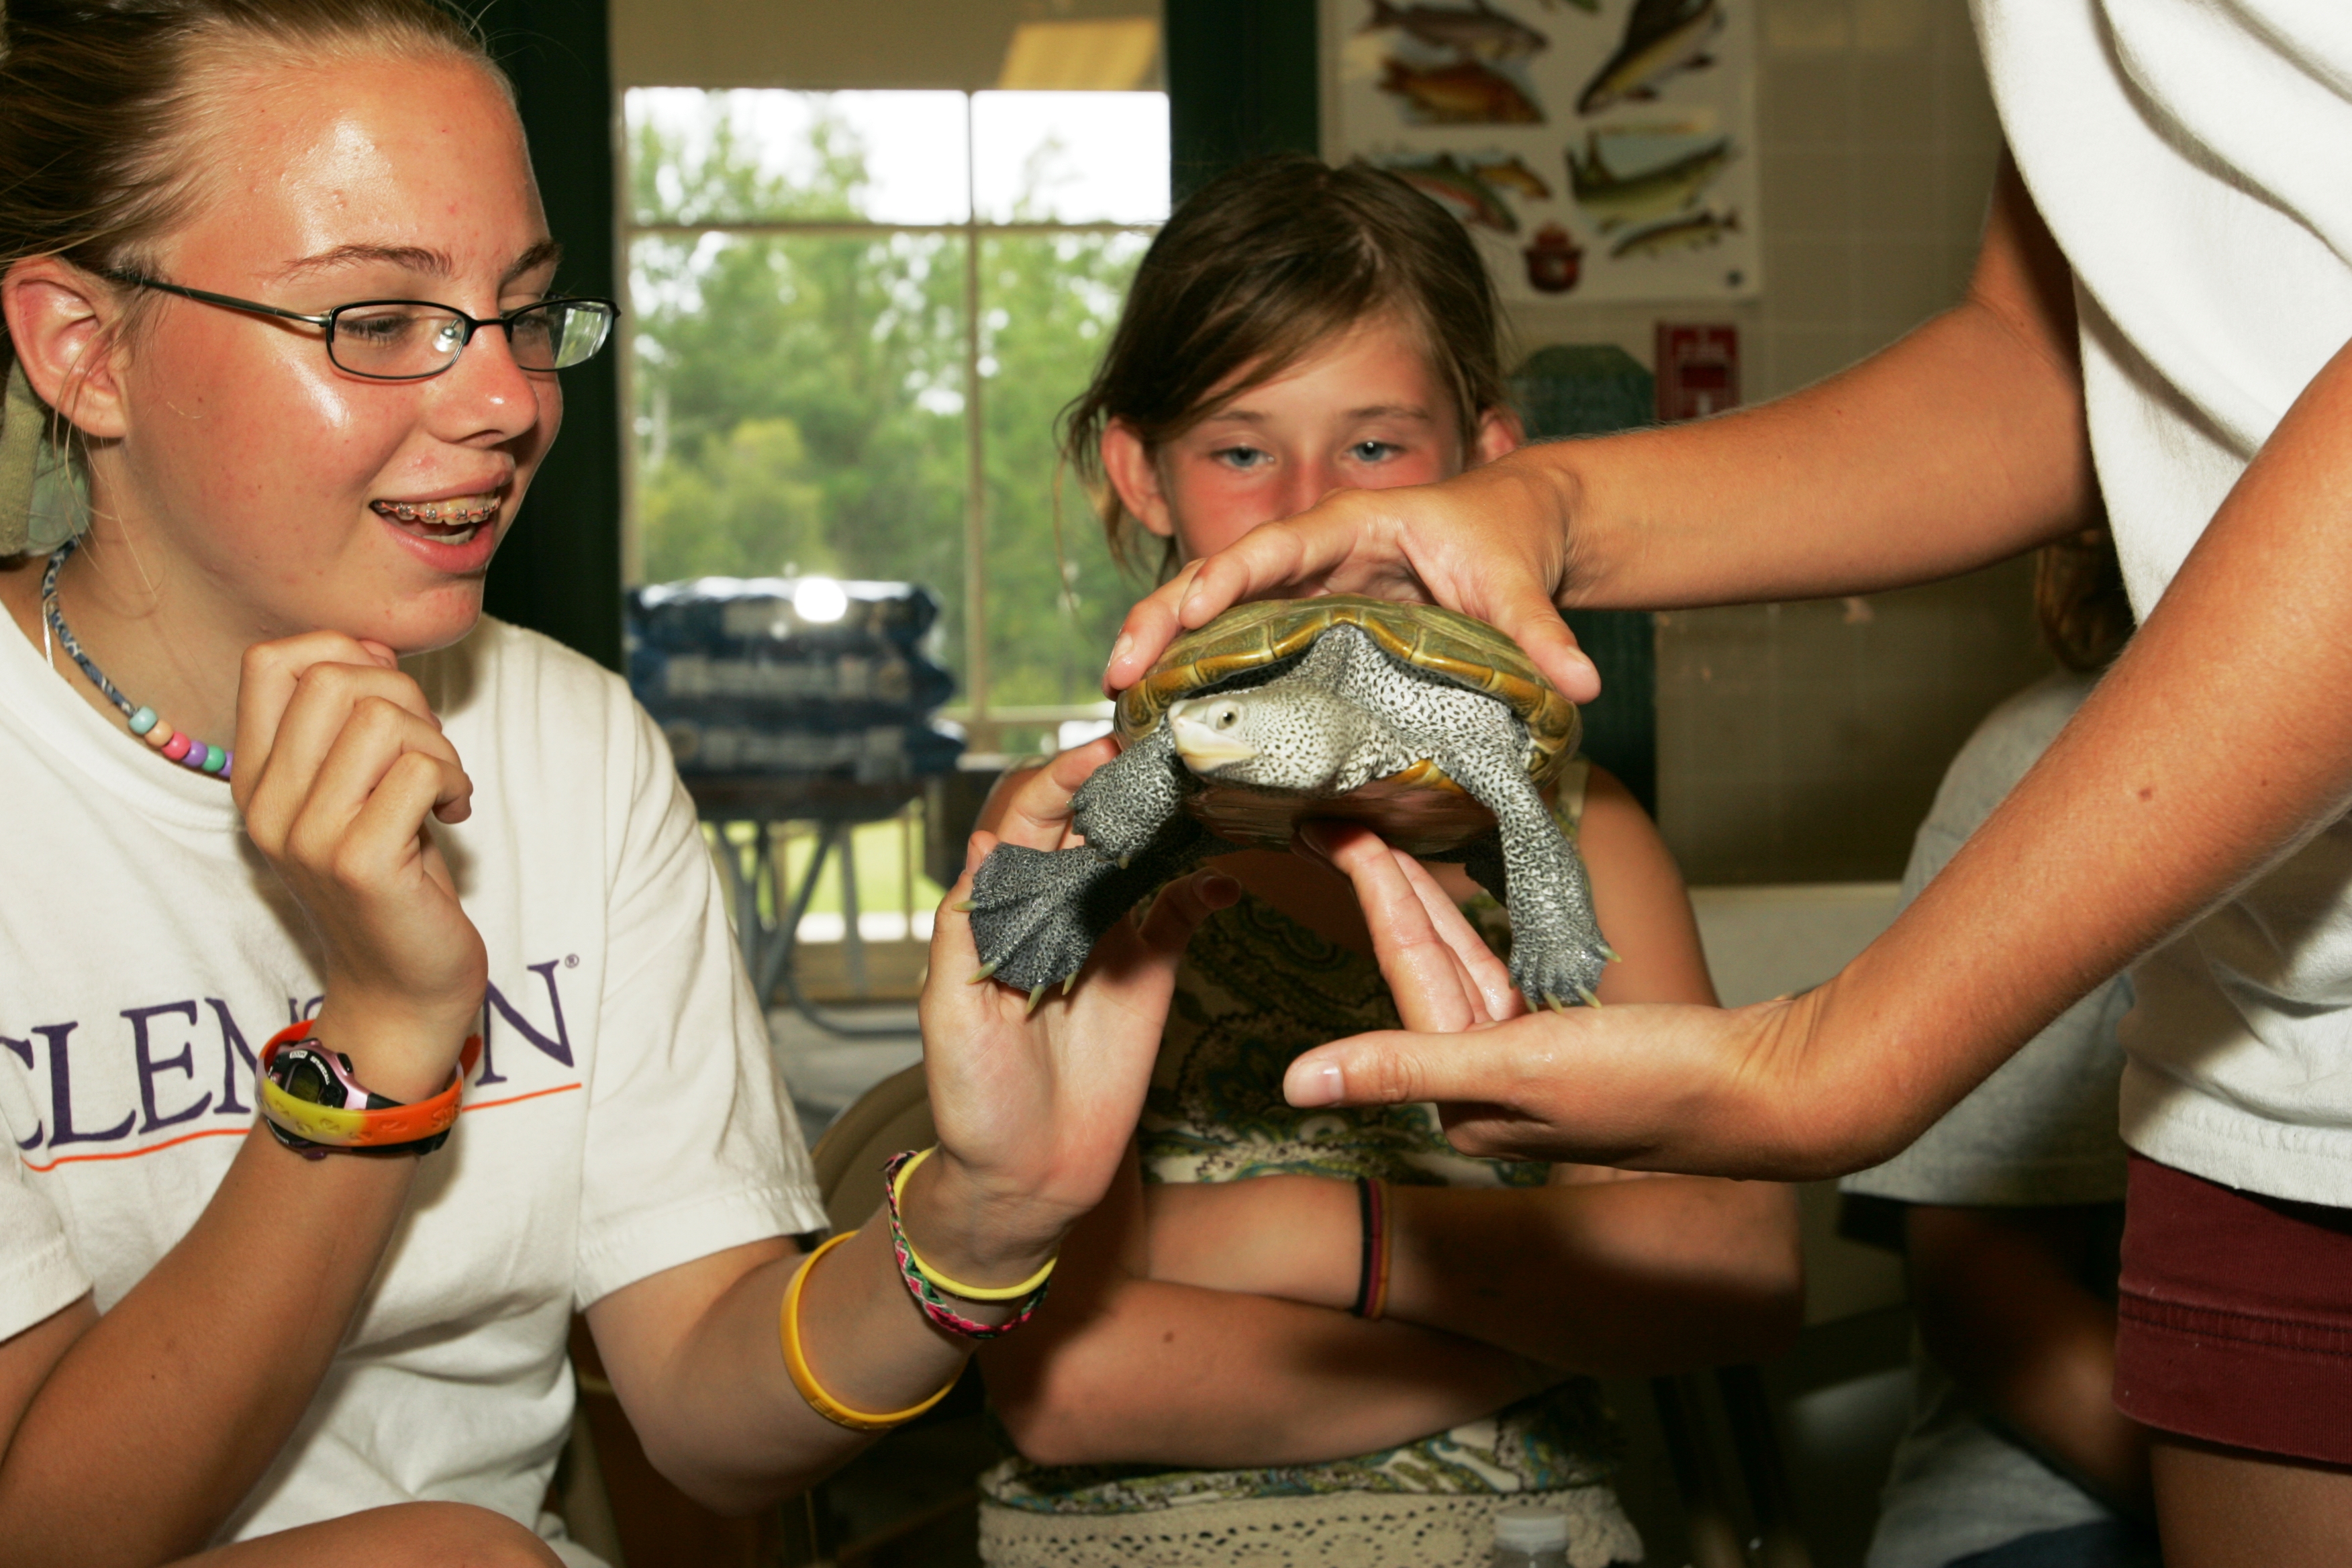 Two young girls in a reptile class are learning about native turtles. One girl touches the diamondback terrapin held by the educator as the other girl looks from behind the turtle.